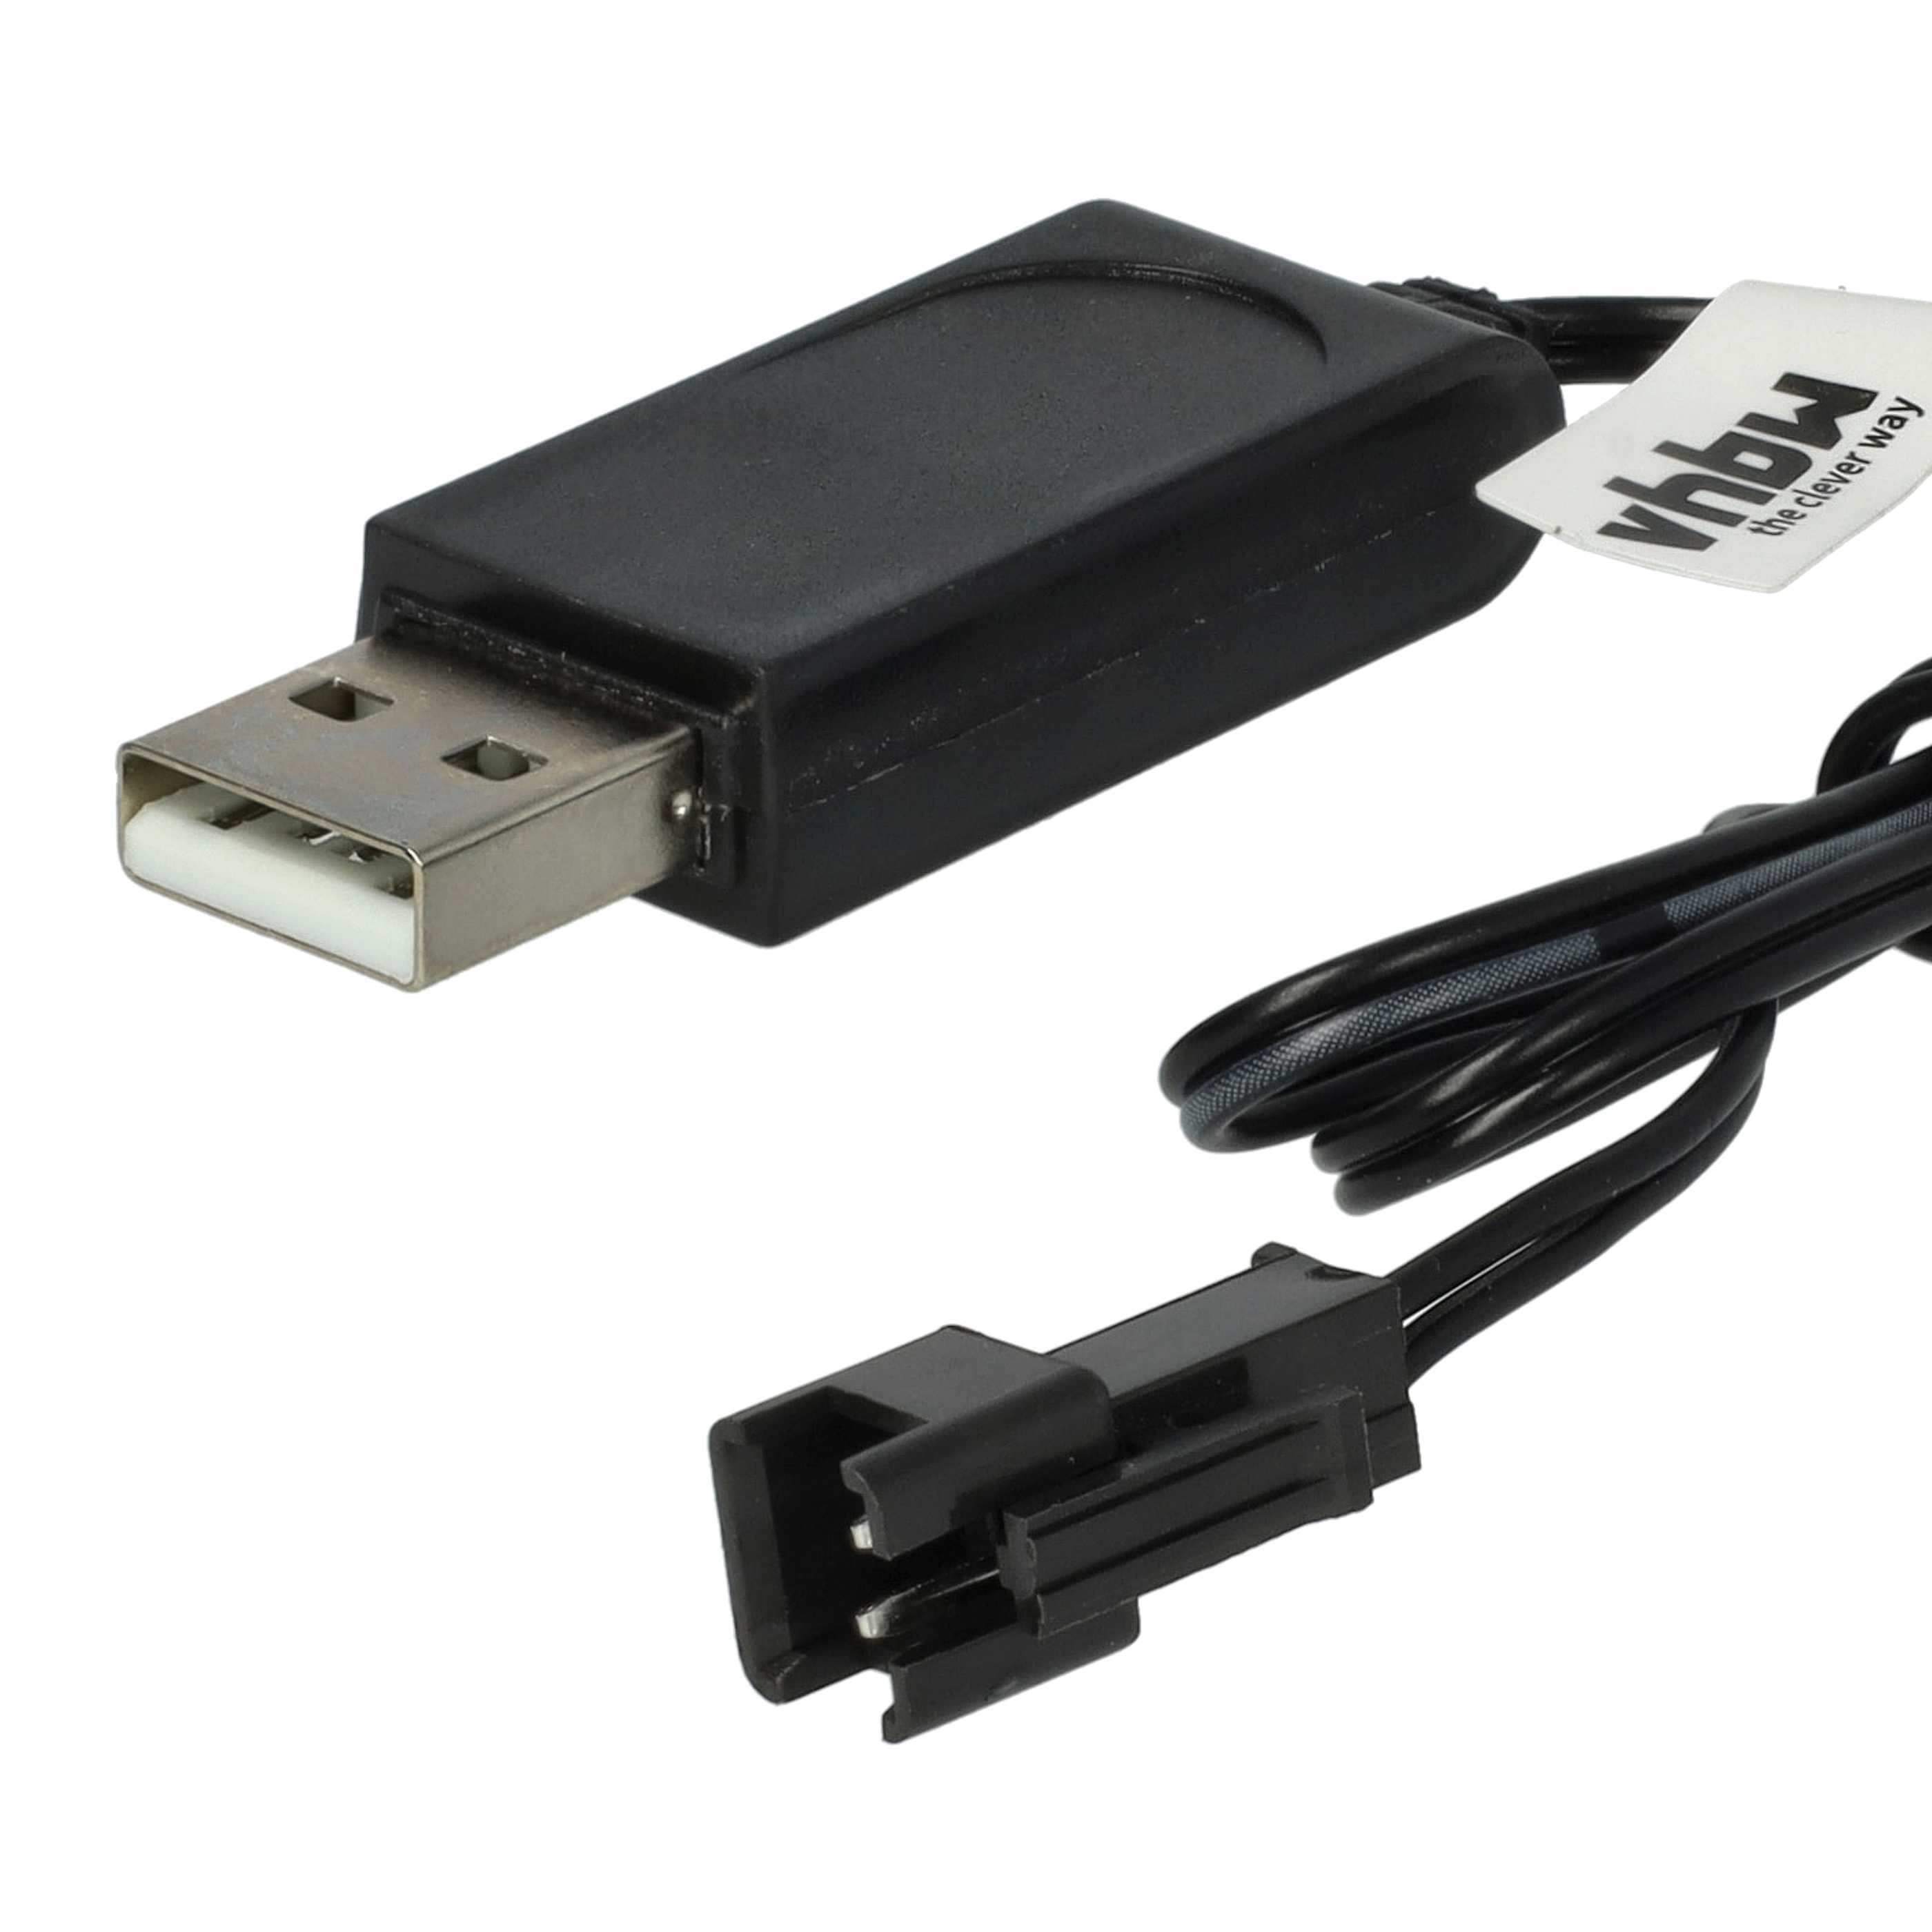 USB Charging Cable suitable for RC Batteries with SM-2P Connector, RC Model Making Battery Packs - 60 cm 6 V